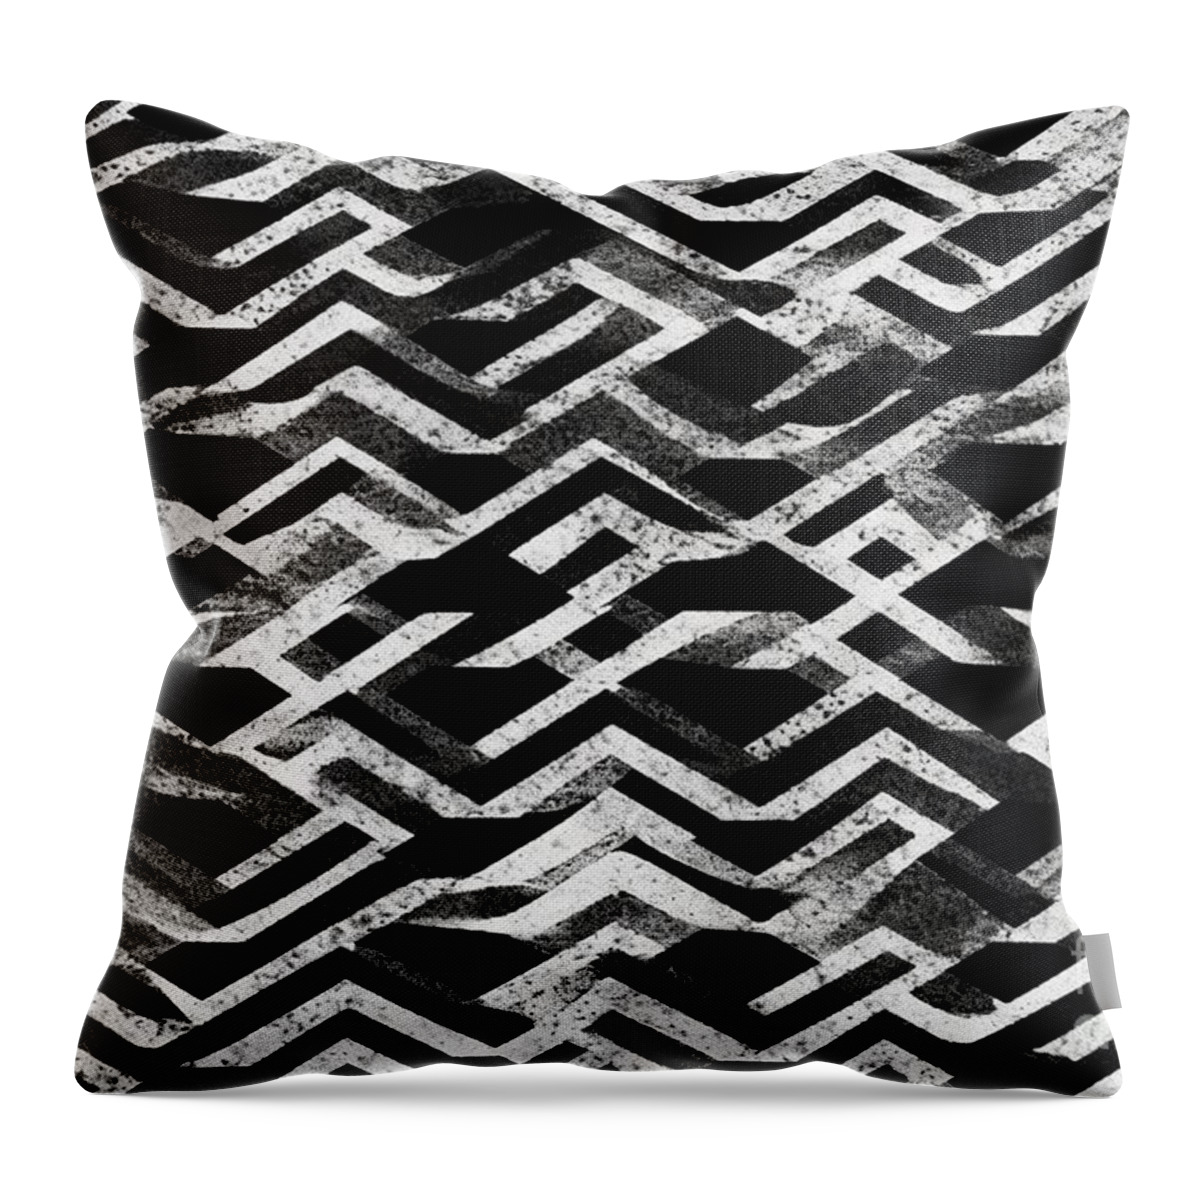 Seamless Throw Pillow featuring the painting Seamless Painted Hexagon Stripe Weave Black And White Artistic Acrylic Paint Texture Background Creative Grunge Monochrome Hand Drawn Geometric Woven Motif Tileable Surface Pattern Wallpaper Design #2 by N Akkash